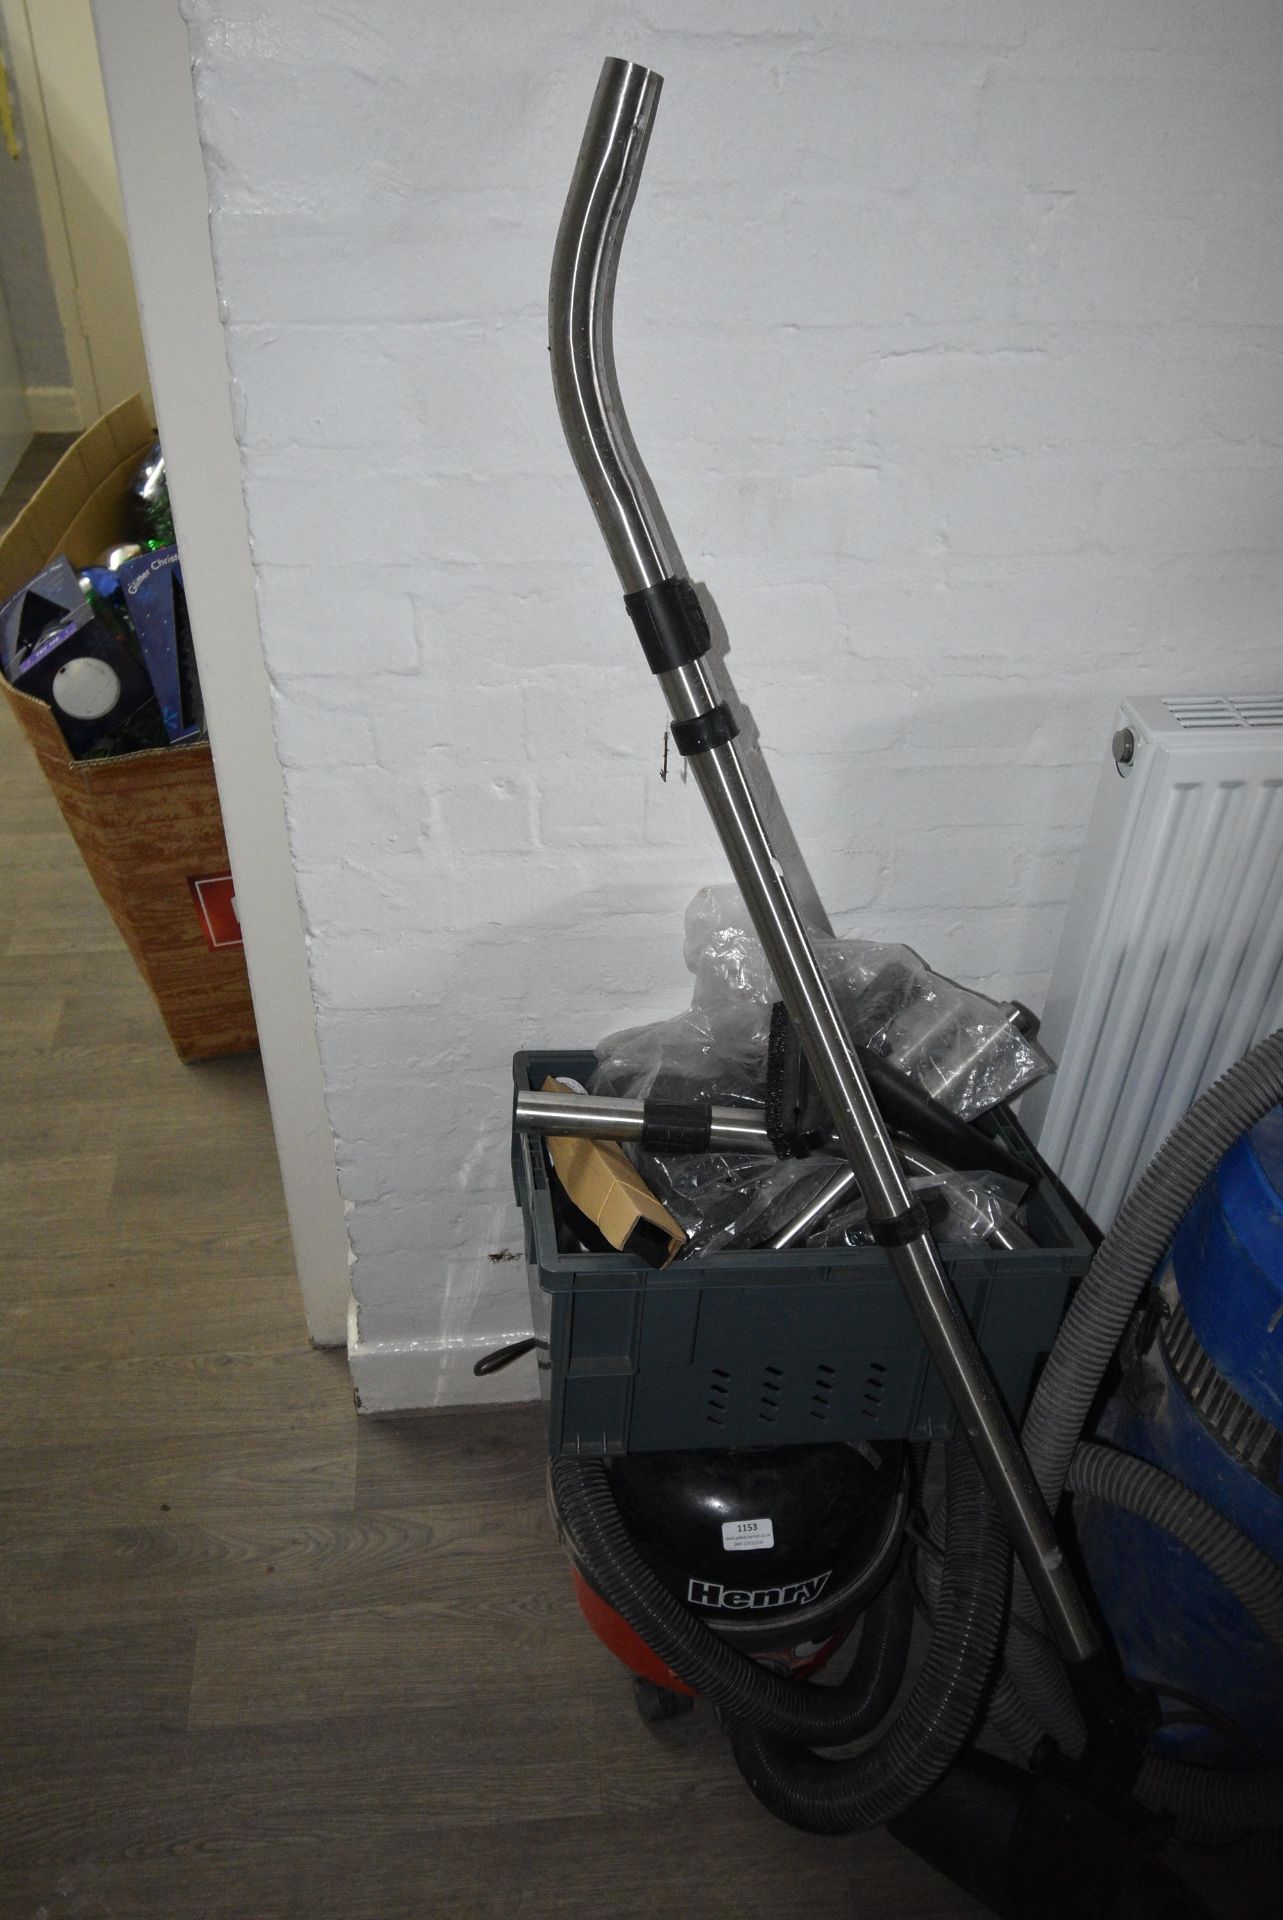 *Henry Vacuum Cleaner with Accessories (Location: 64 King Edward St, Grimsby, DN31 3JP, Viewing